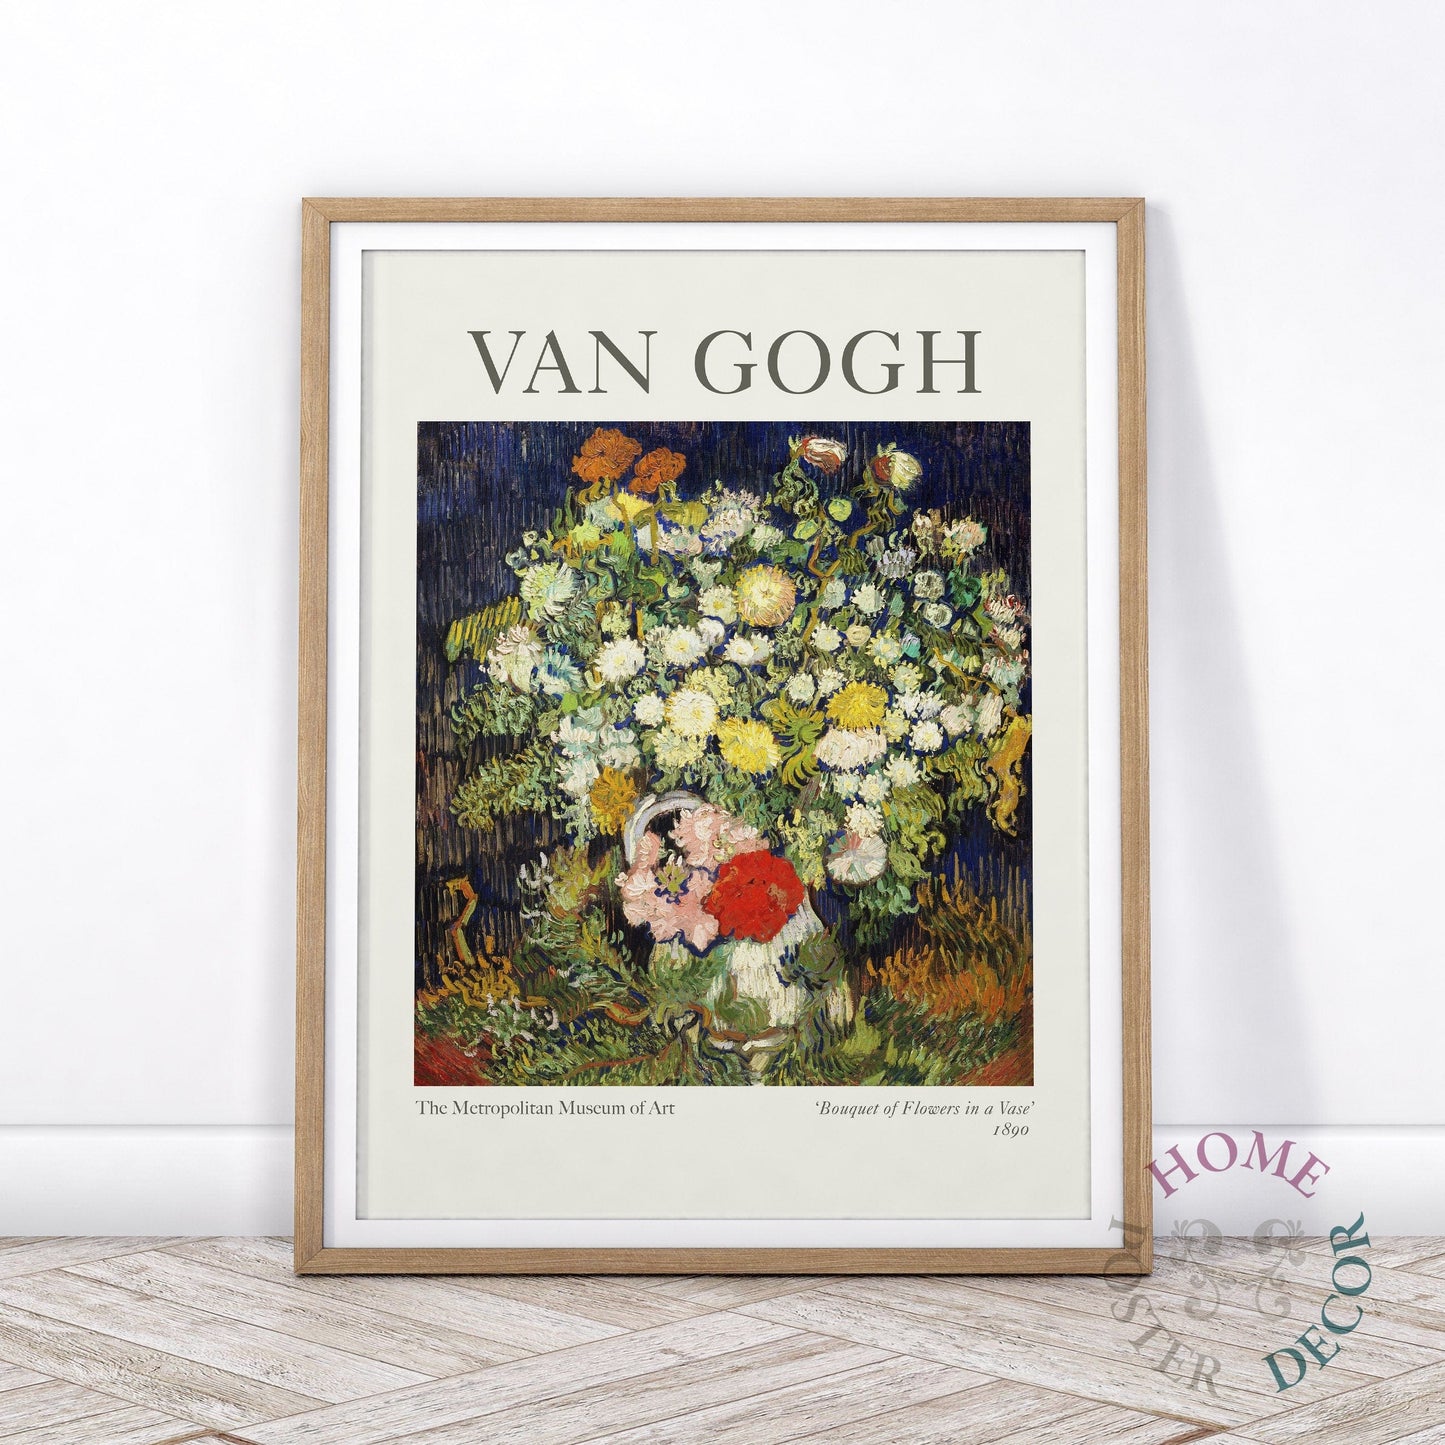 Home Poster Decor Single Van Gogh Poster, Bouquet of Flowers in a Vase, Anniversary Gift